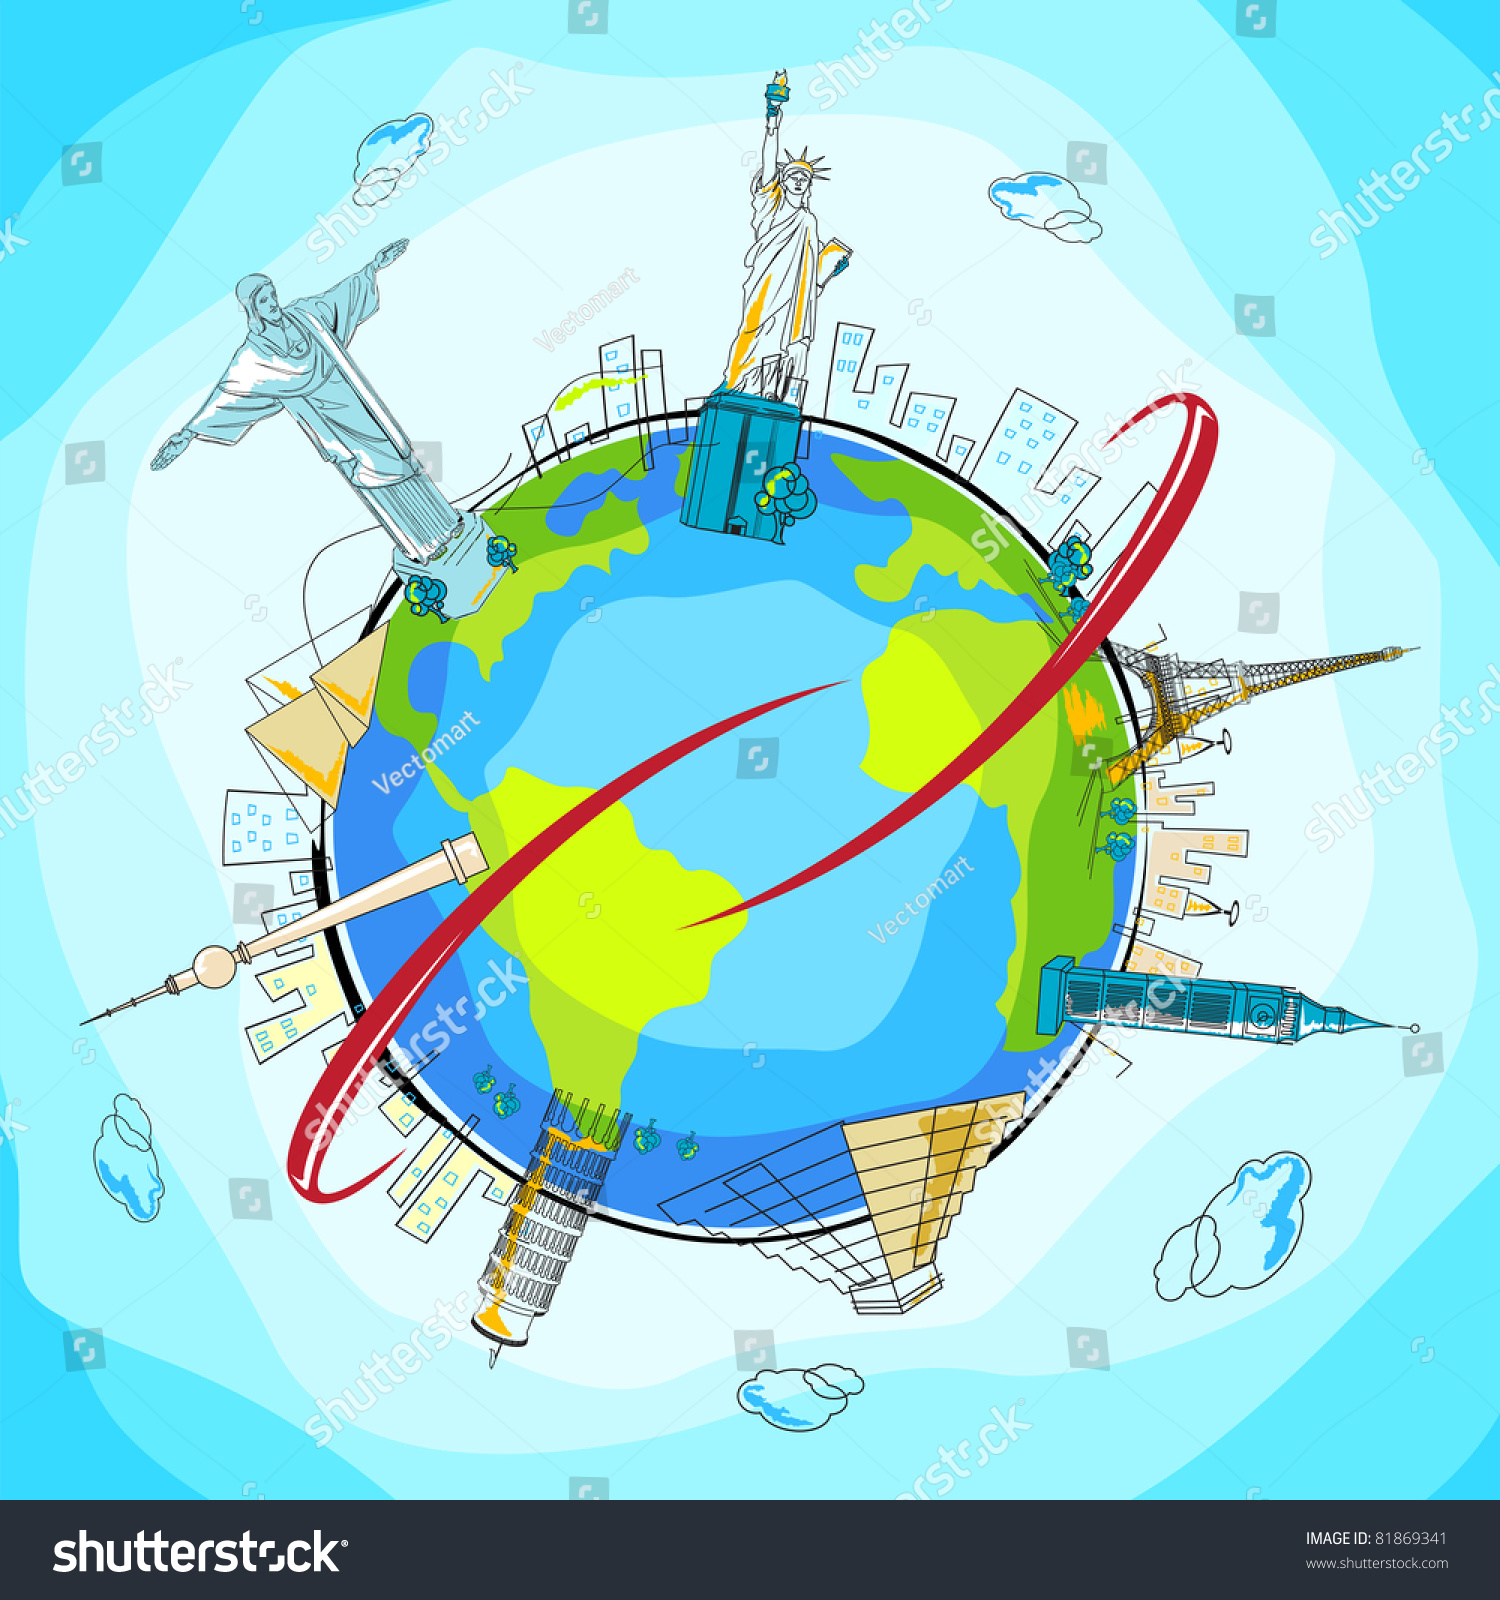 Illustration Famous Monuments Around World Showing Stock Vector ...